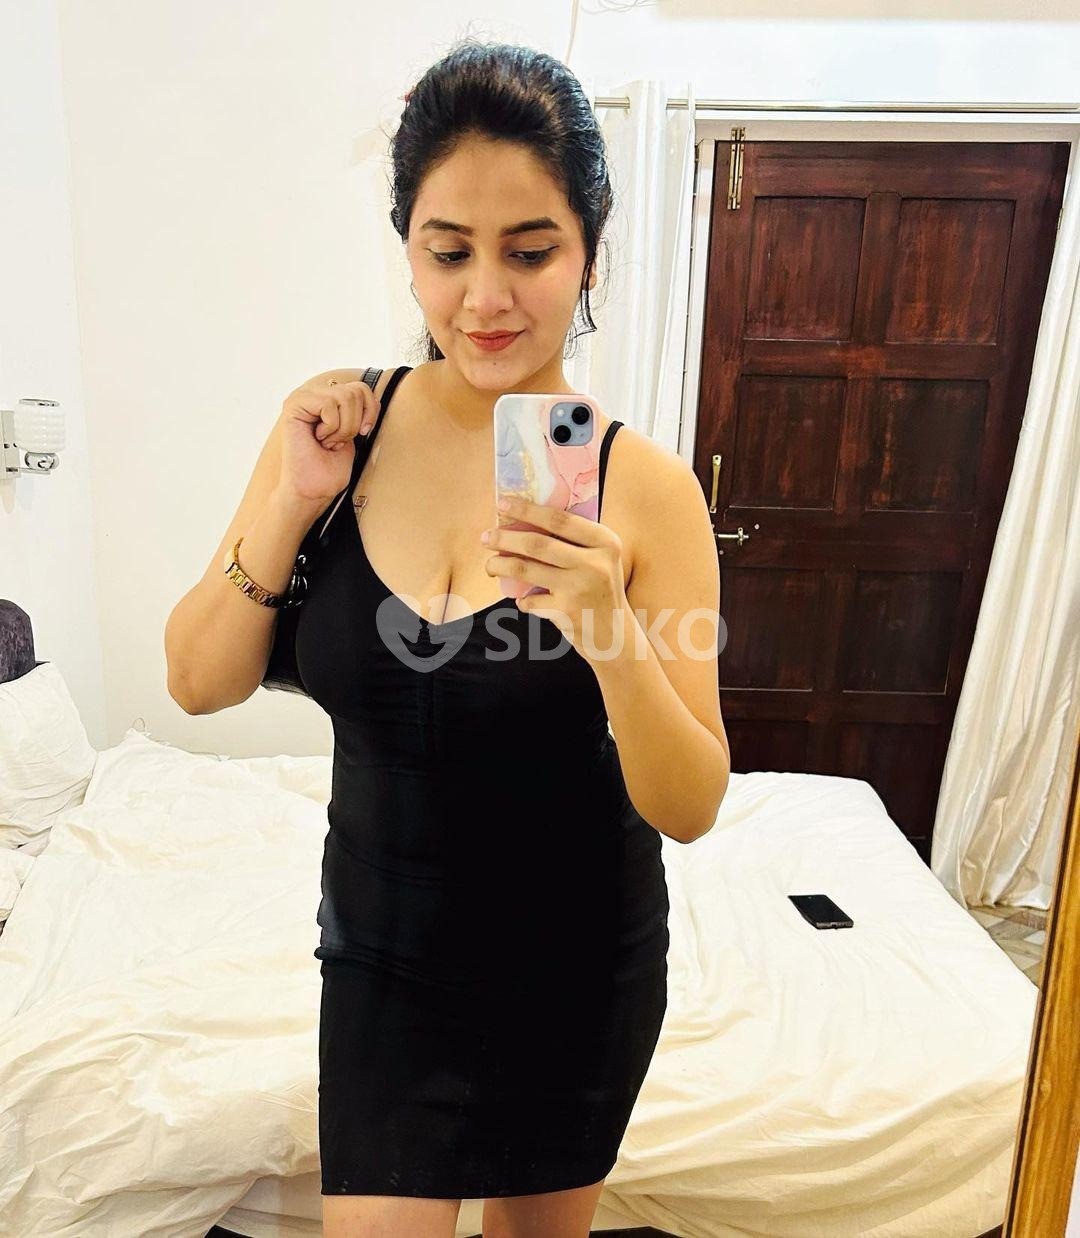 BOMMANAHALI 💥 24×7 DOORSTEP INCALL ❤ OUTCALL SERVICE AVAILABLE CALL ME NOW LOW RATE PRIVATE DECENT LOCAL COLLAGE G